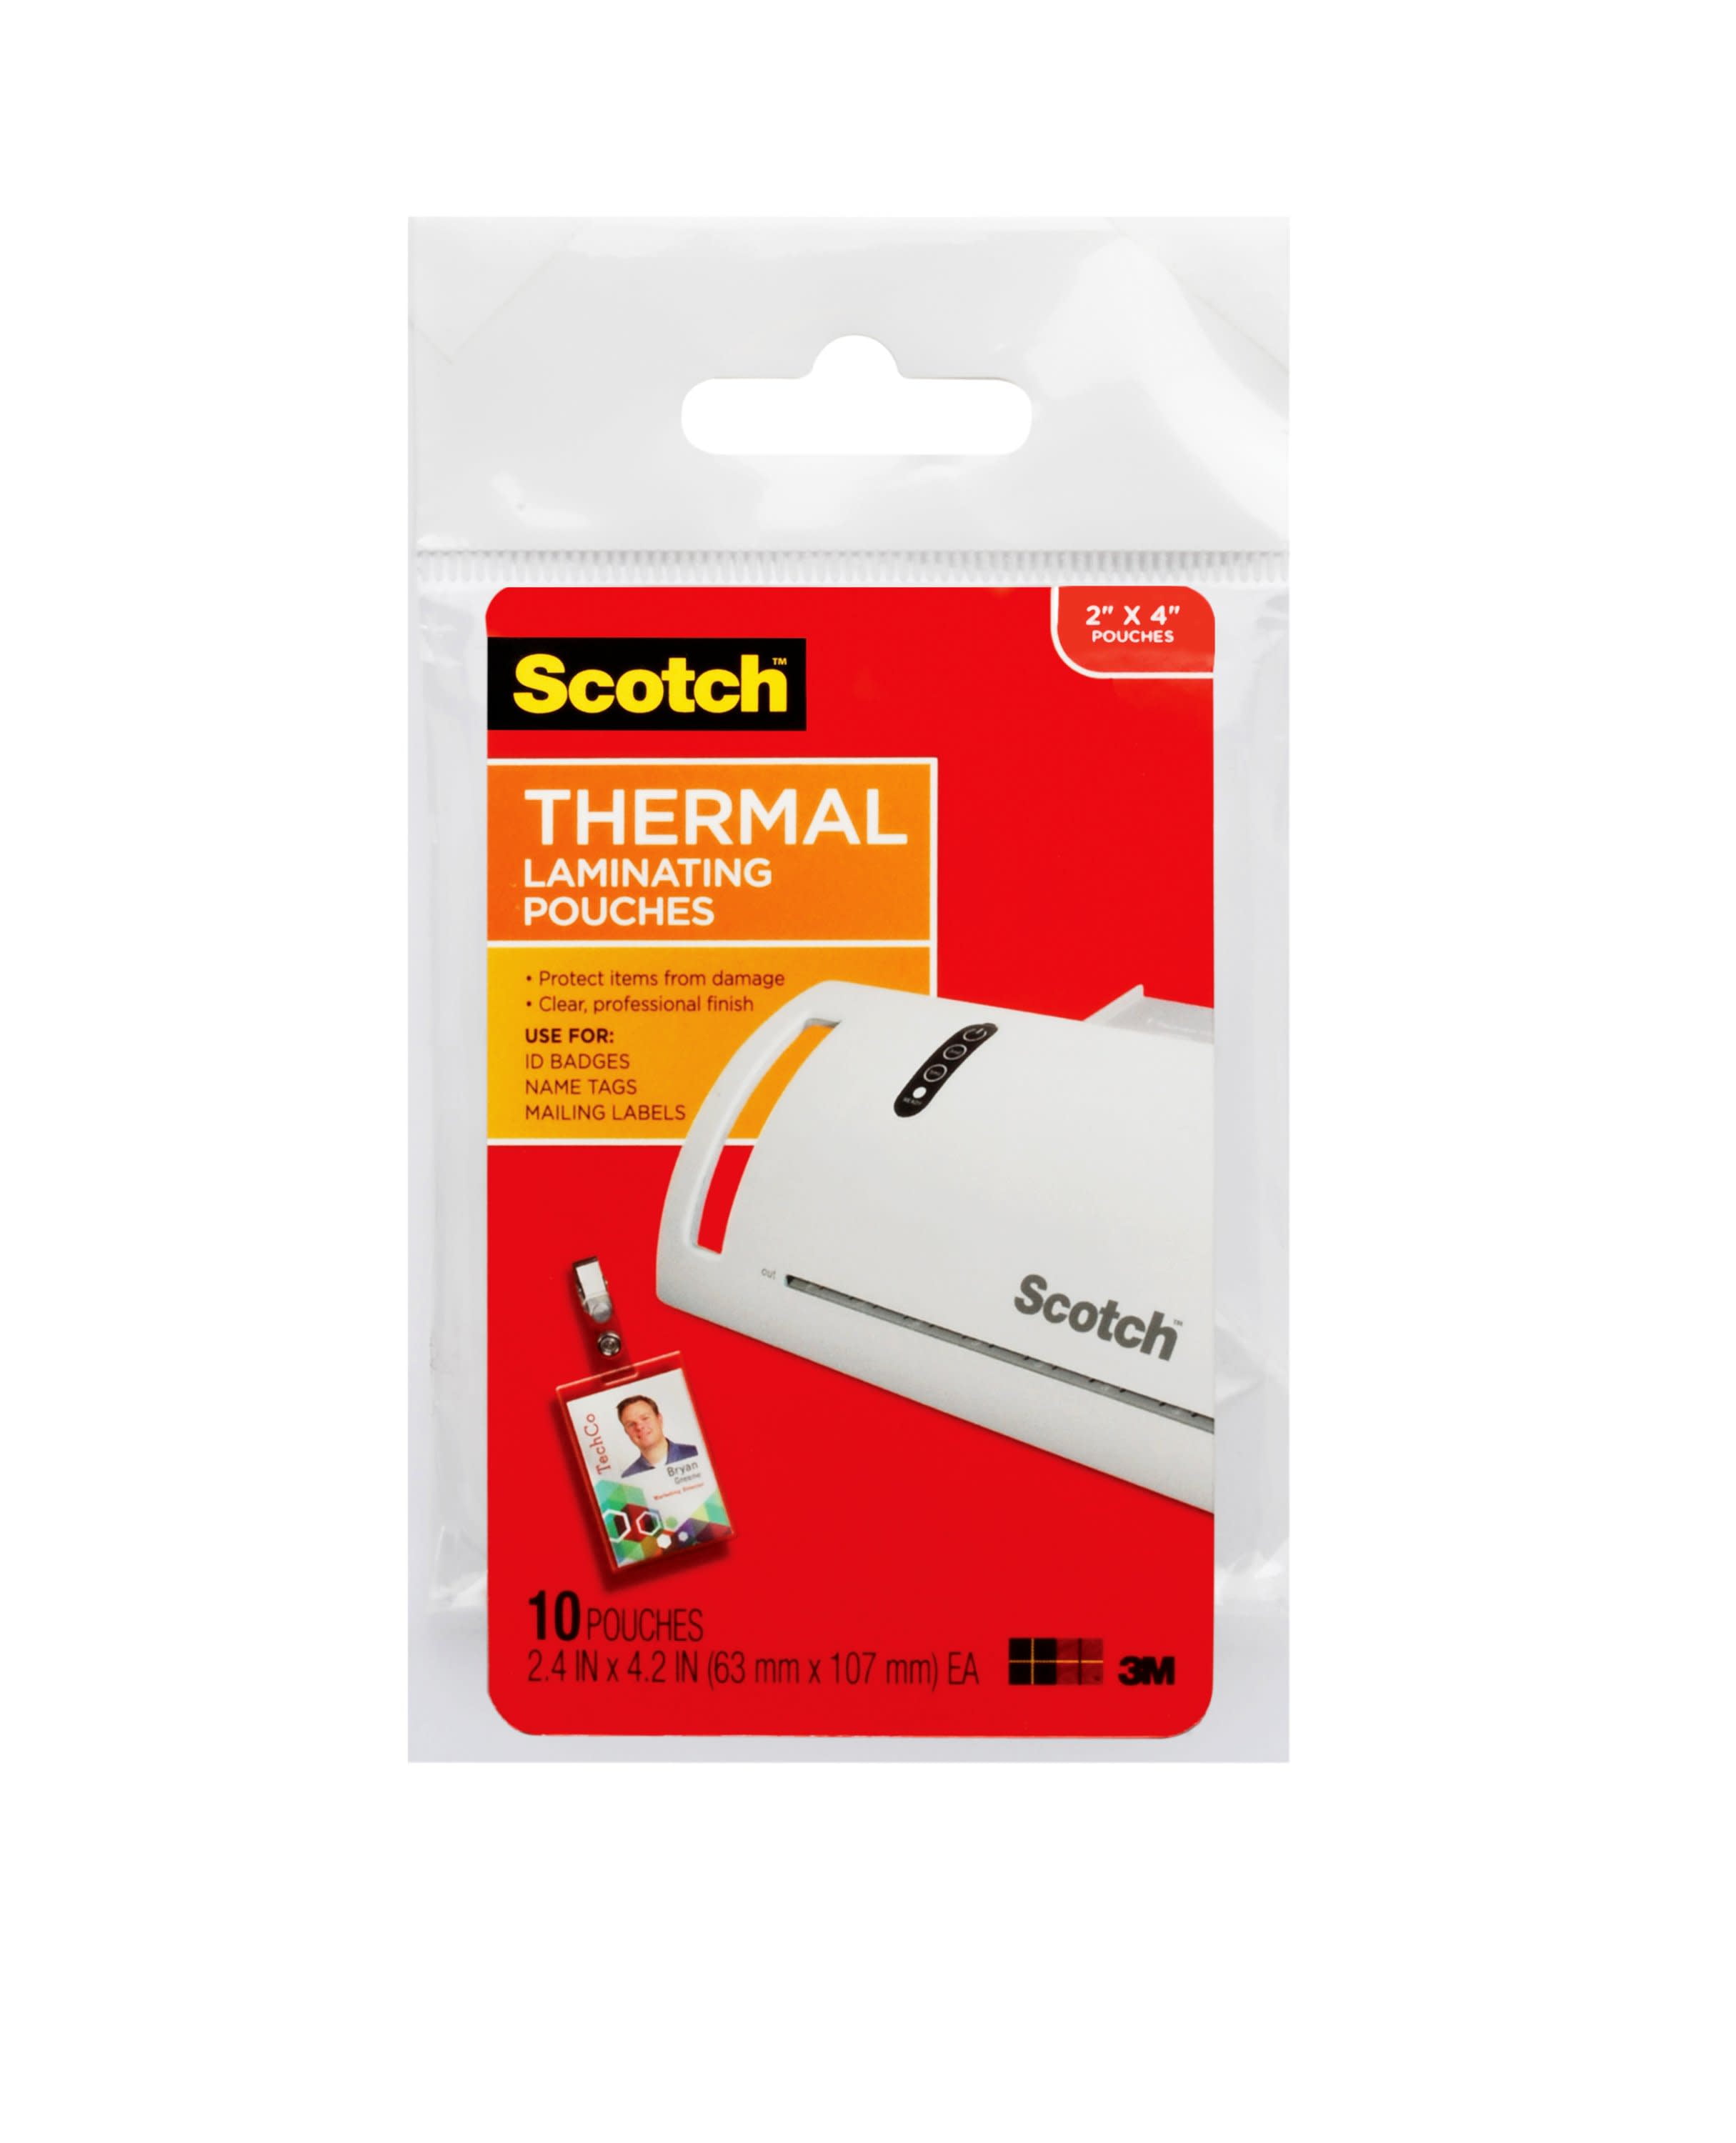 New 3M Corp Scotch Thermal Laminating Pouches 5 x 7-Inches 20-Pouches TP5903-20 